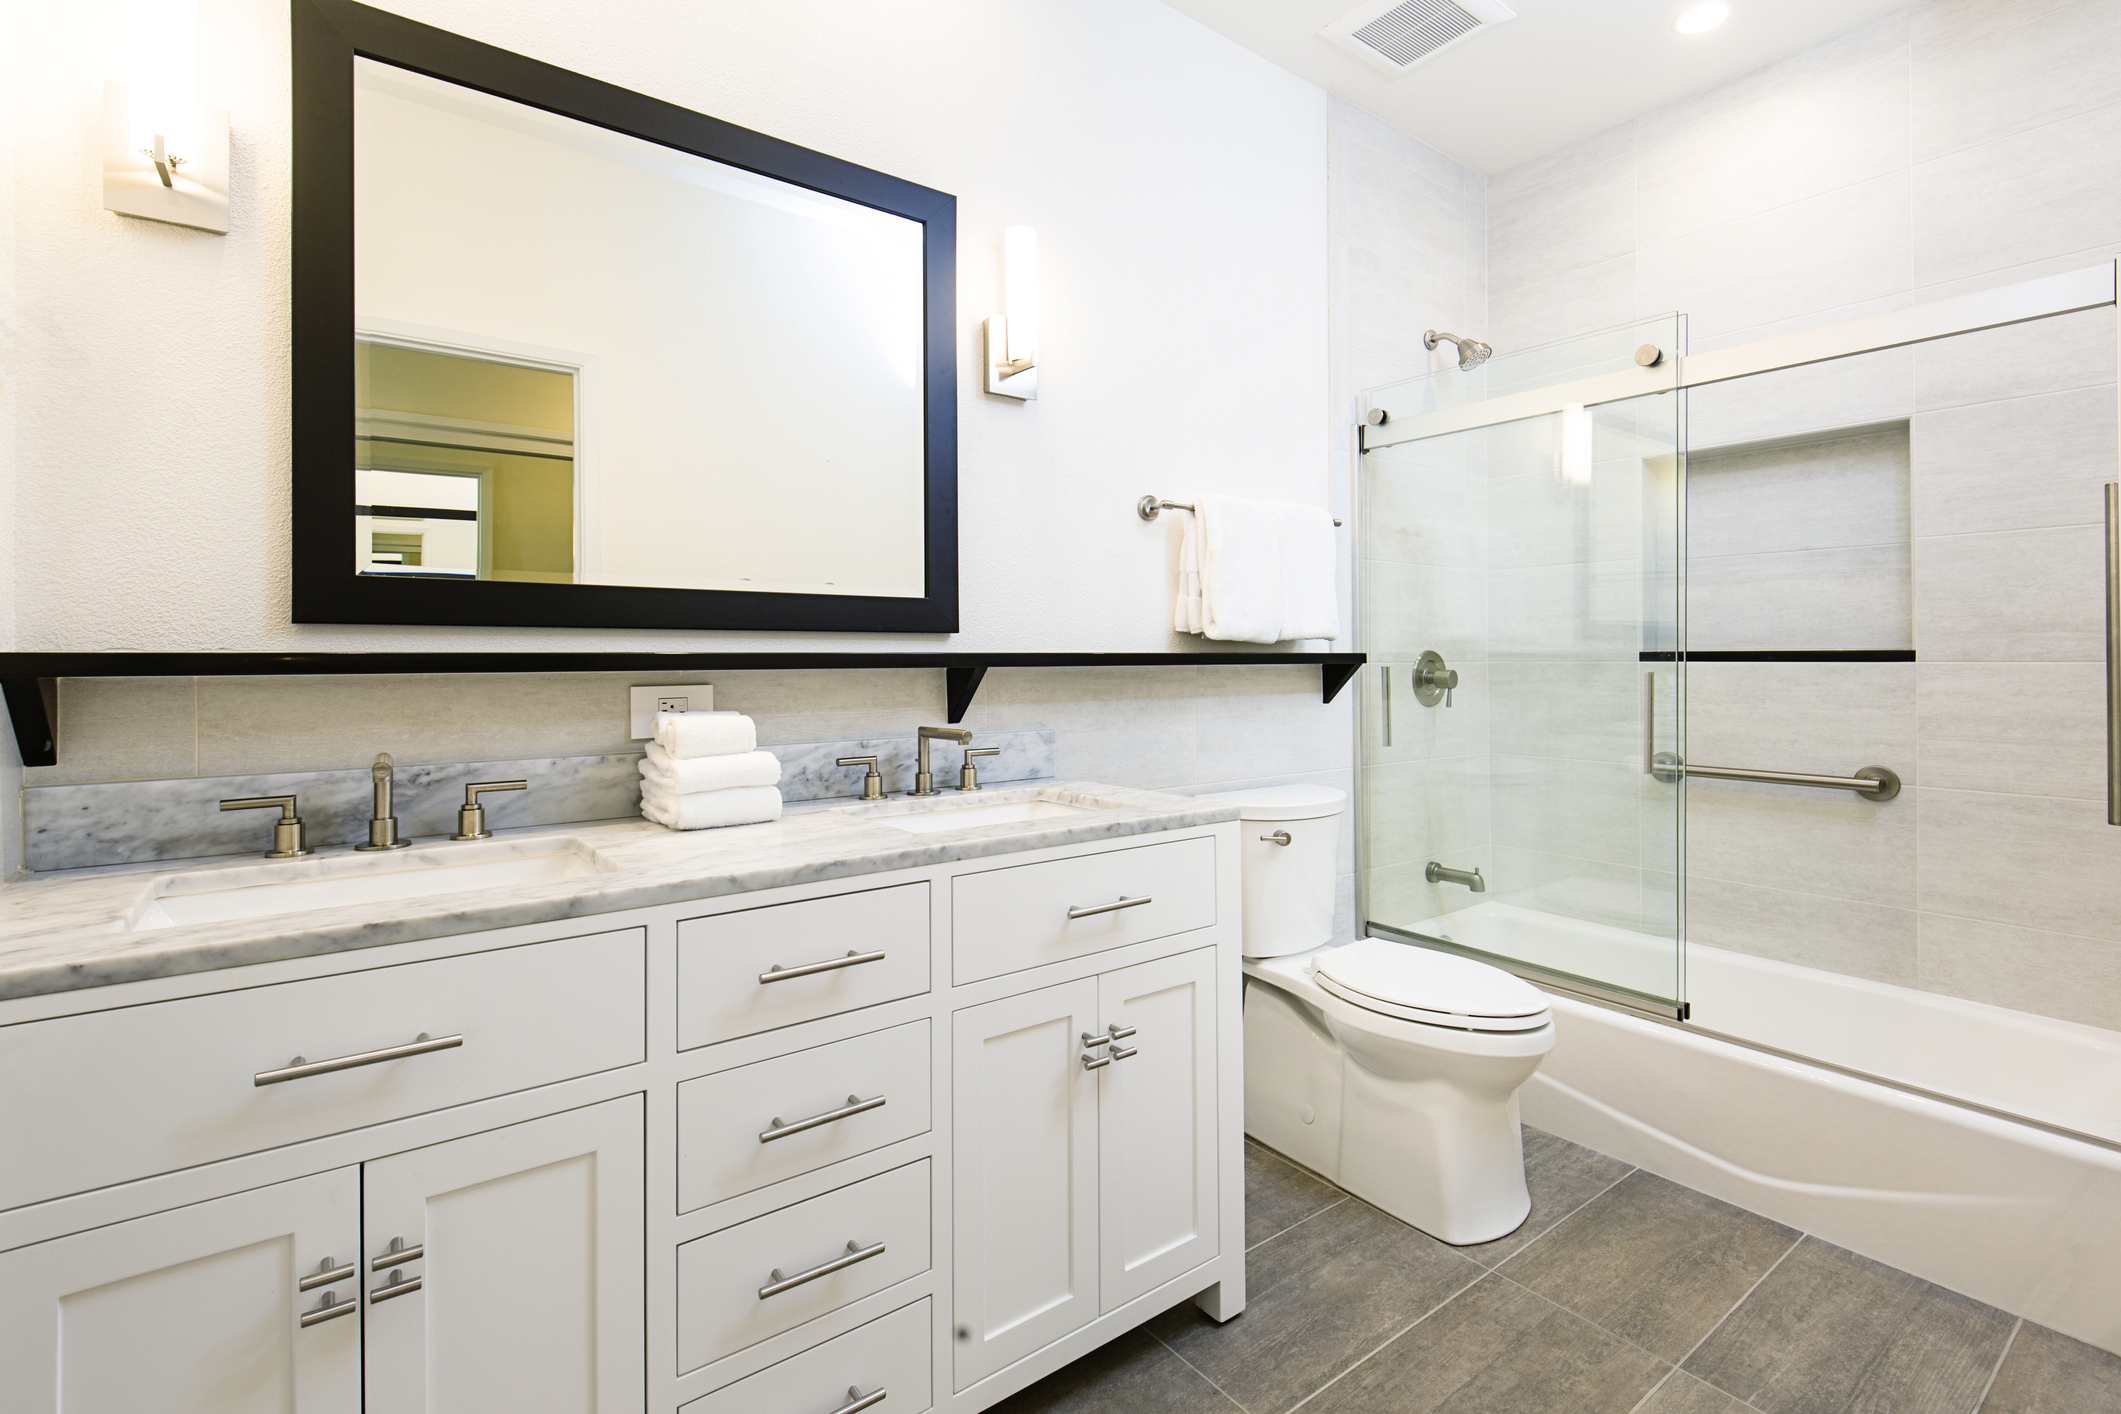 How Much Does A Bathroom Remodel Cost, How Much Does A Bathroom Remodel Permit Cost